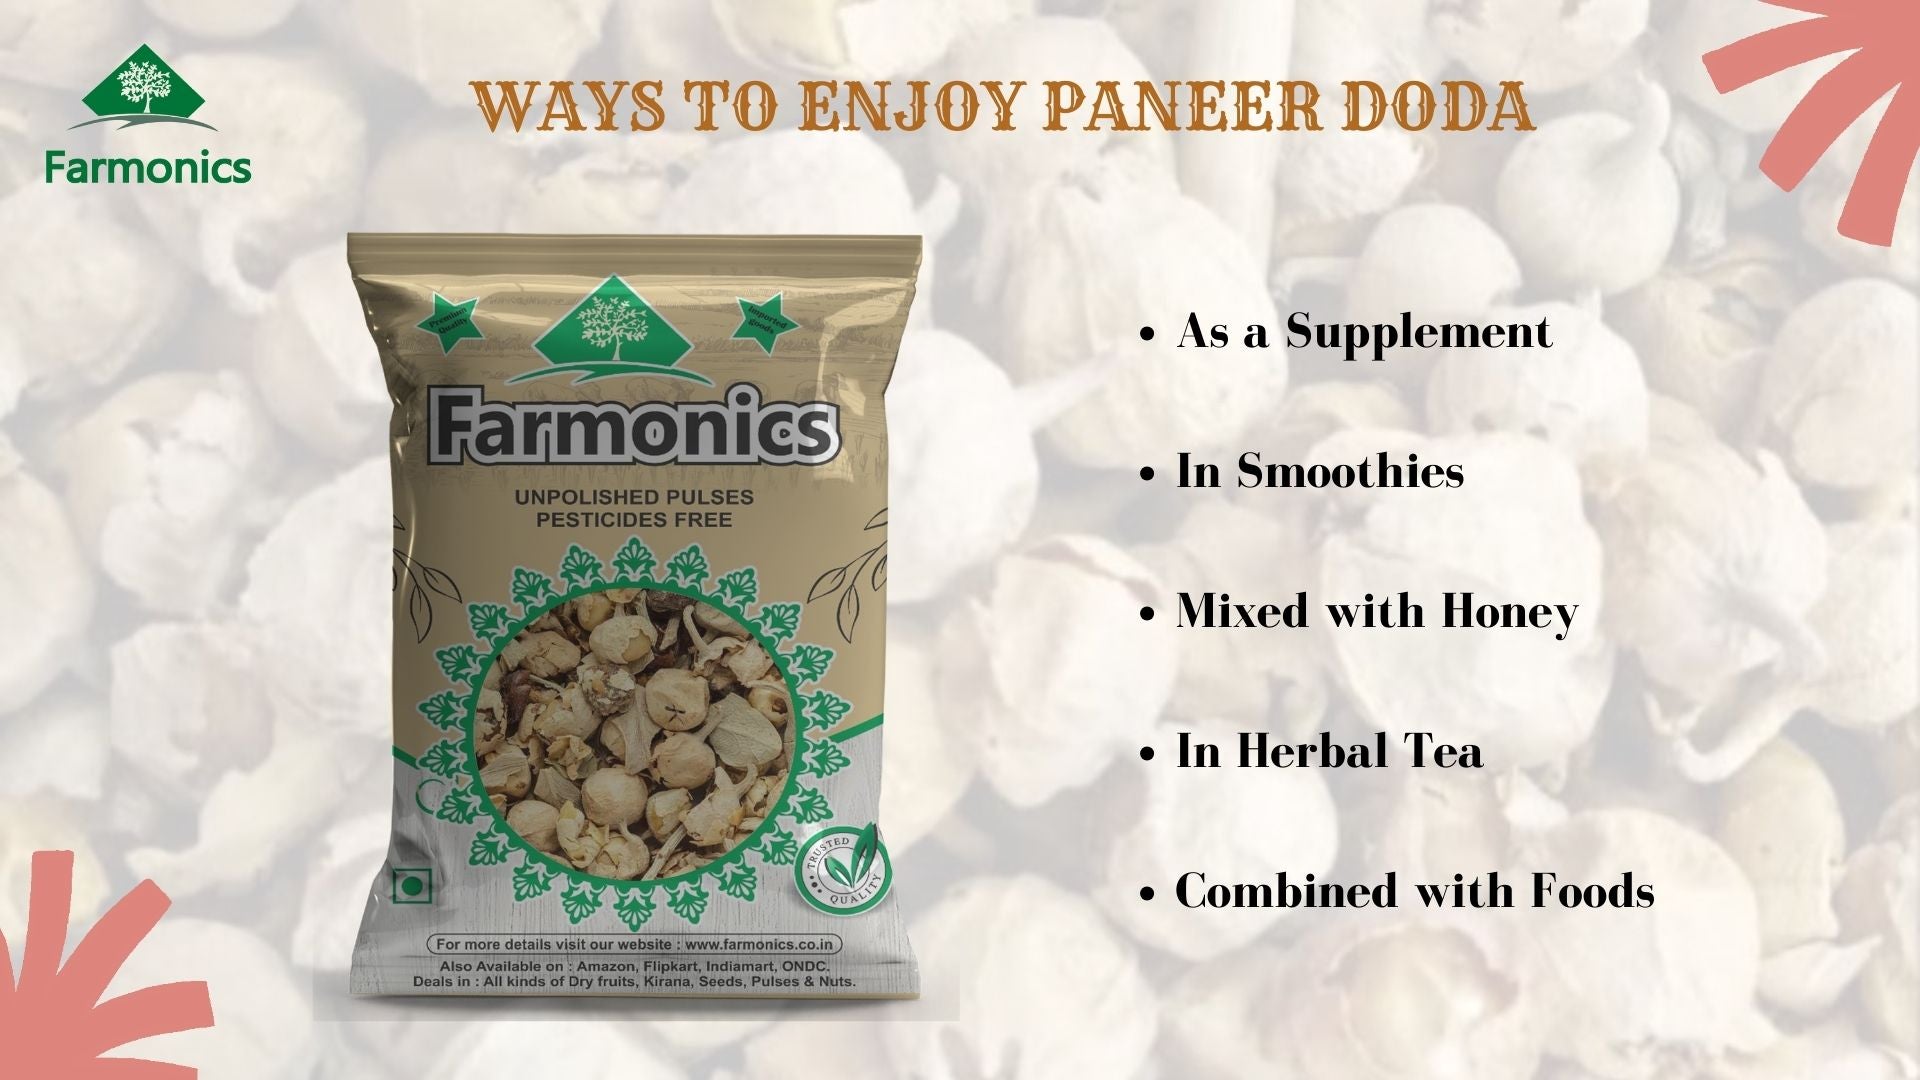 ways in which you can enjoy paneer doda offeredc by farmonics 